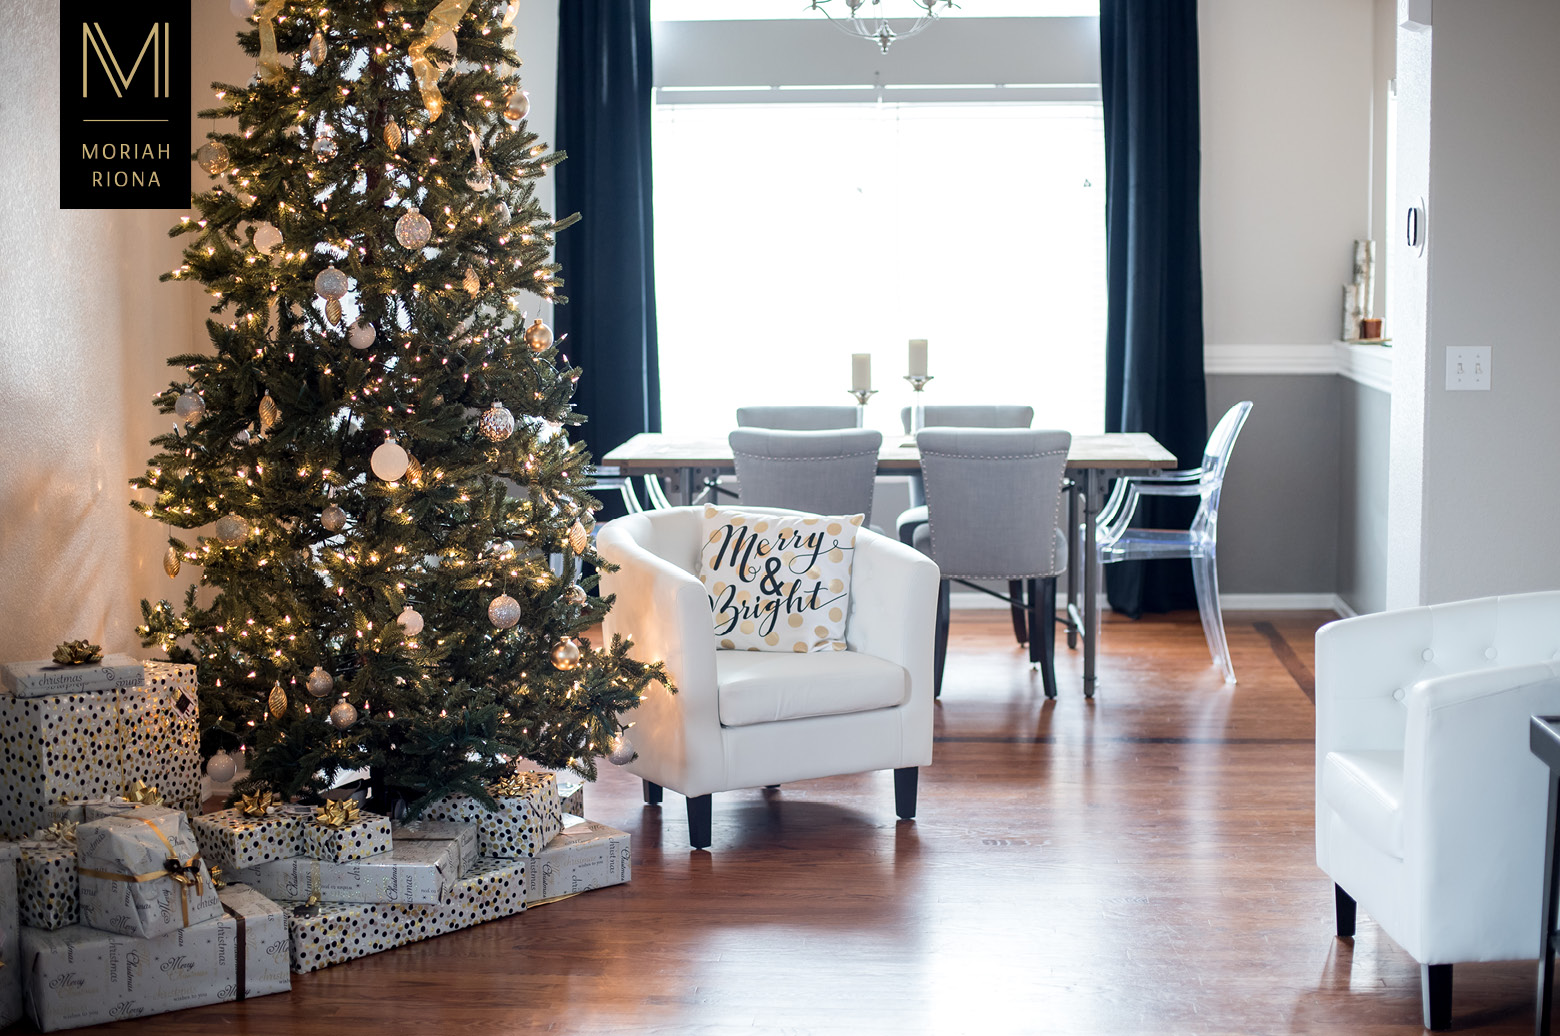 Holiday Style Home Tour with glam black, white and gold Christmas decor. Metallic gold and silver Christmas tree trimming. Holiday decorating by Moriah Riona in luxe regency glam style, Kate Spade inspired.